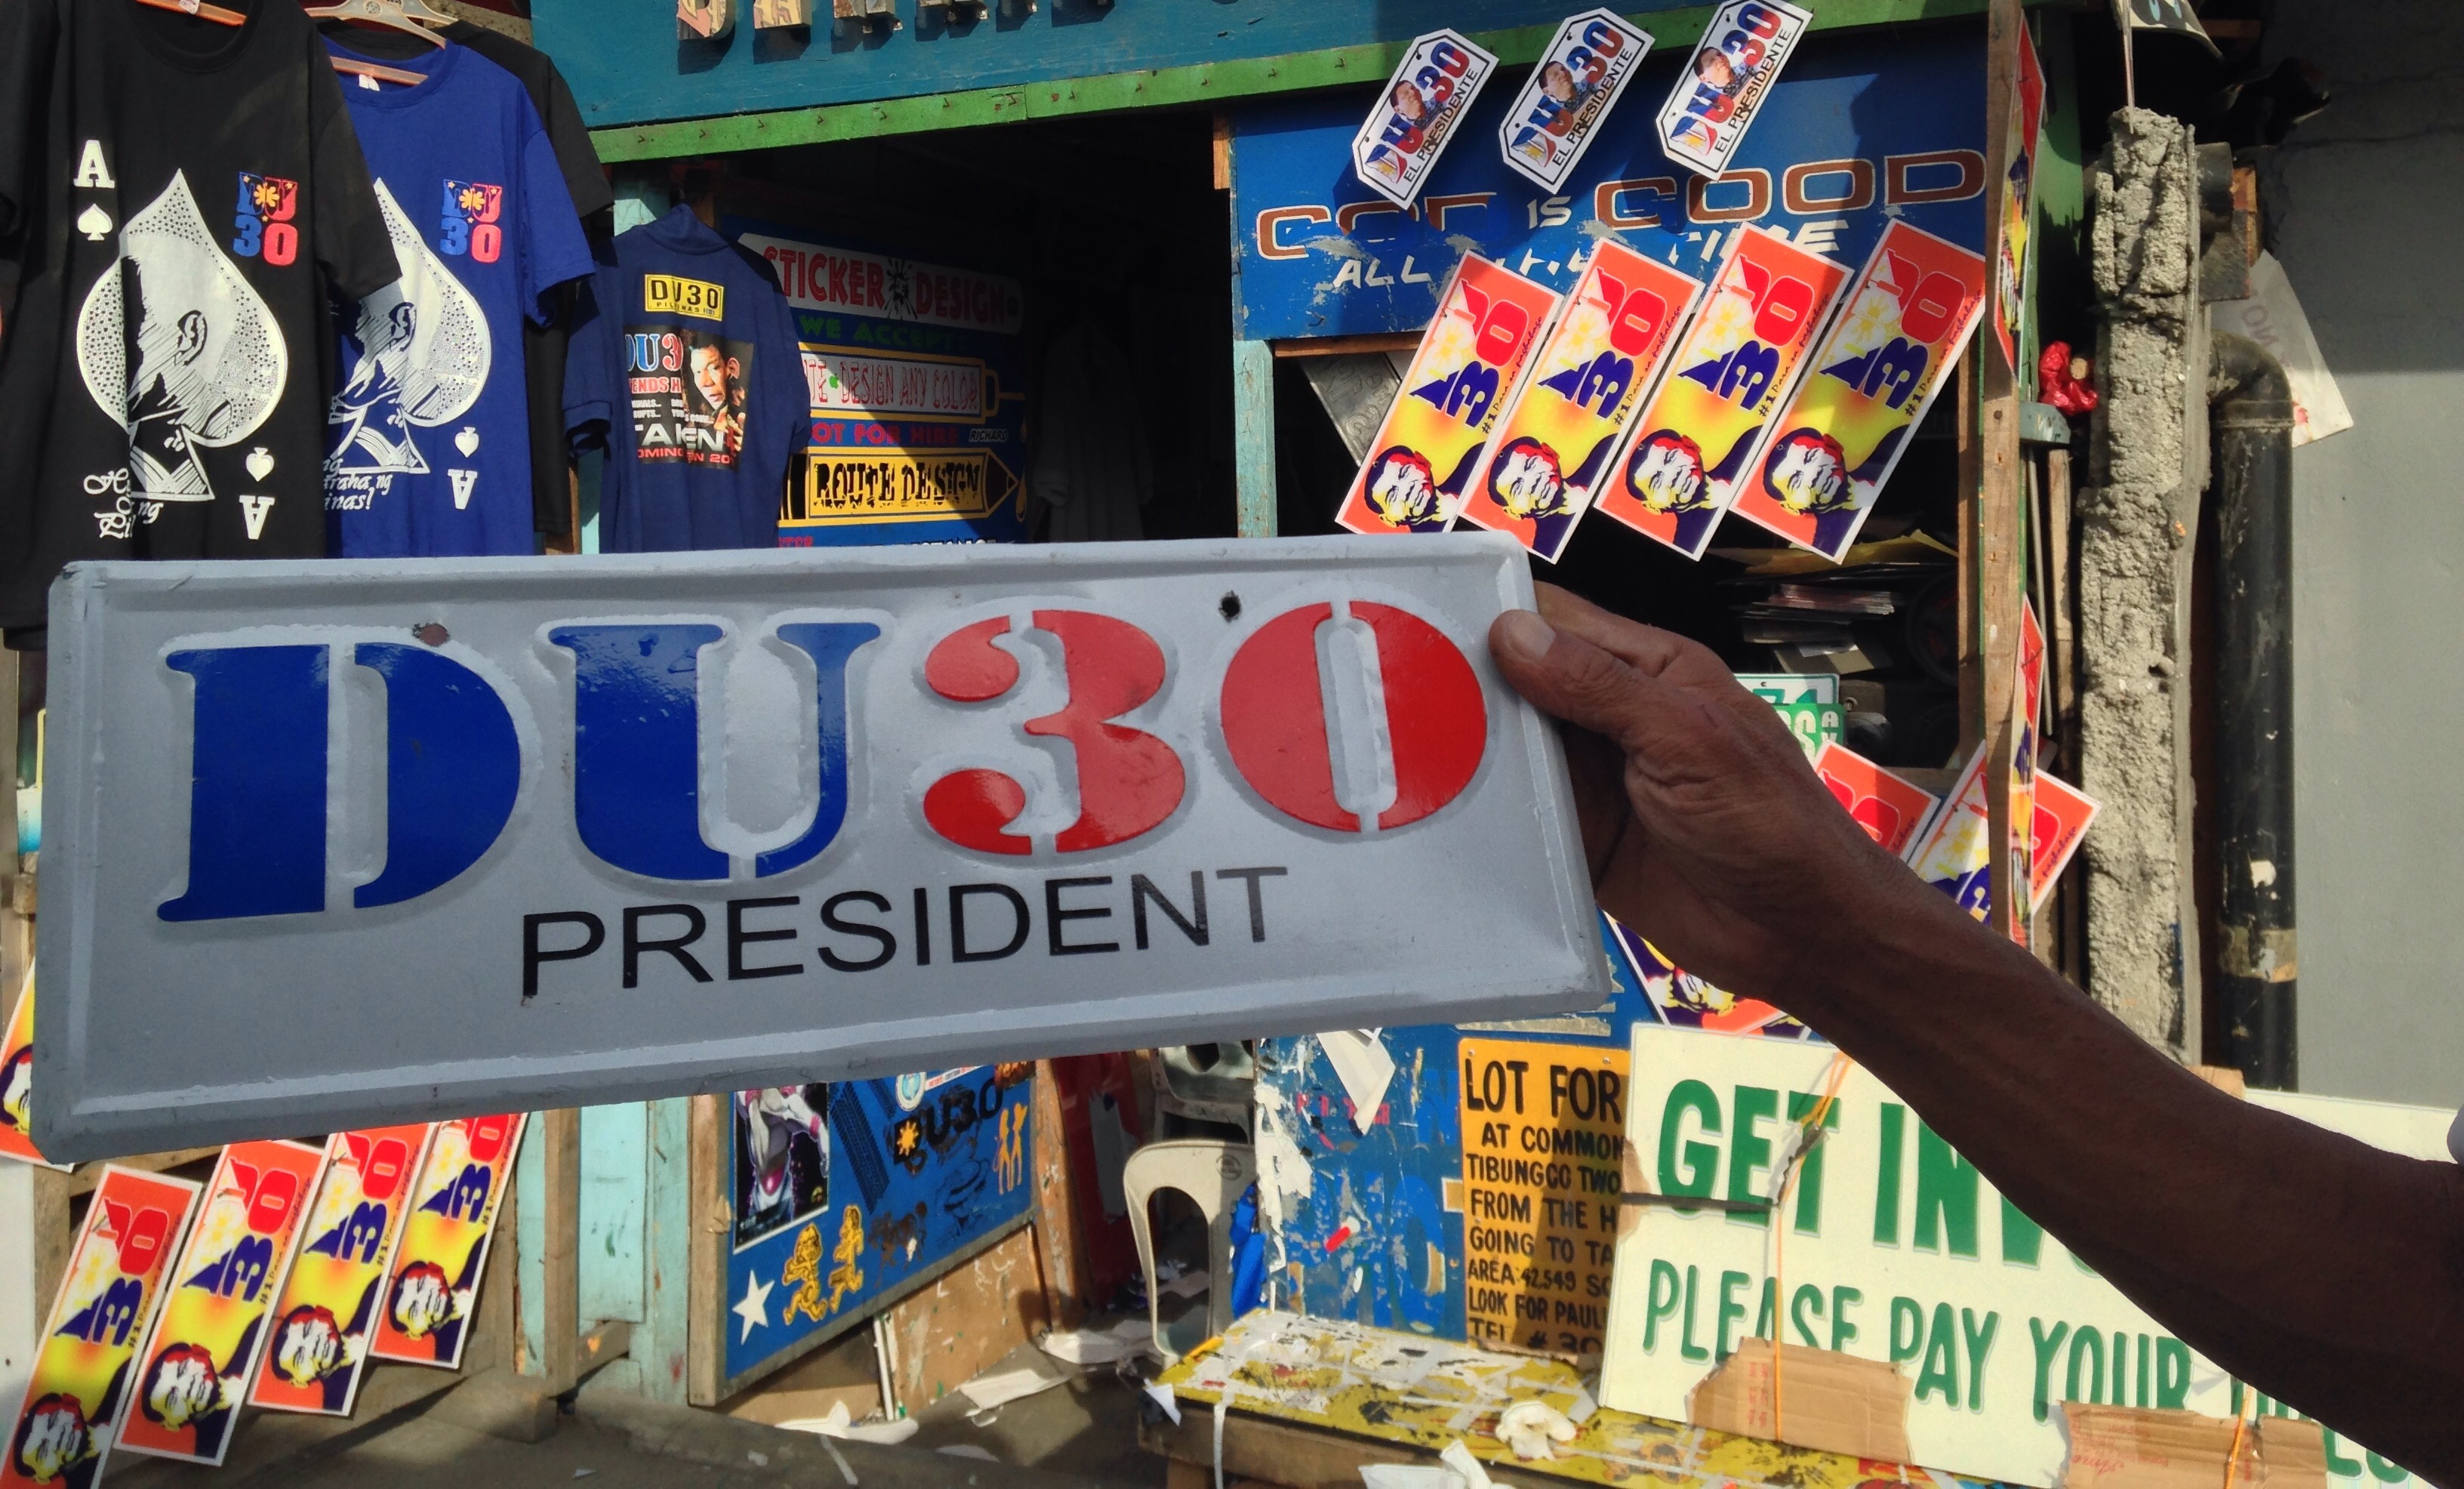 The Duterte campaign gave sidewalk entrepreneurs extra income by selling tee-shirts, stickers, or these decorative plates. The Land Transportation Office, however has warned against using this in lieu of the authorized license plates. This embossed decorative plate is a post-election design. MIndaNews photo by CAROLYN O. ARGUILLAS